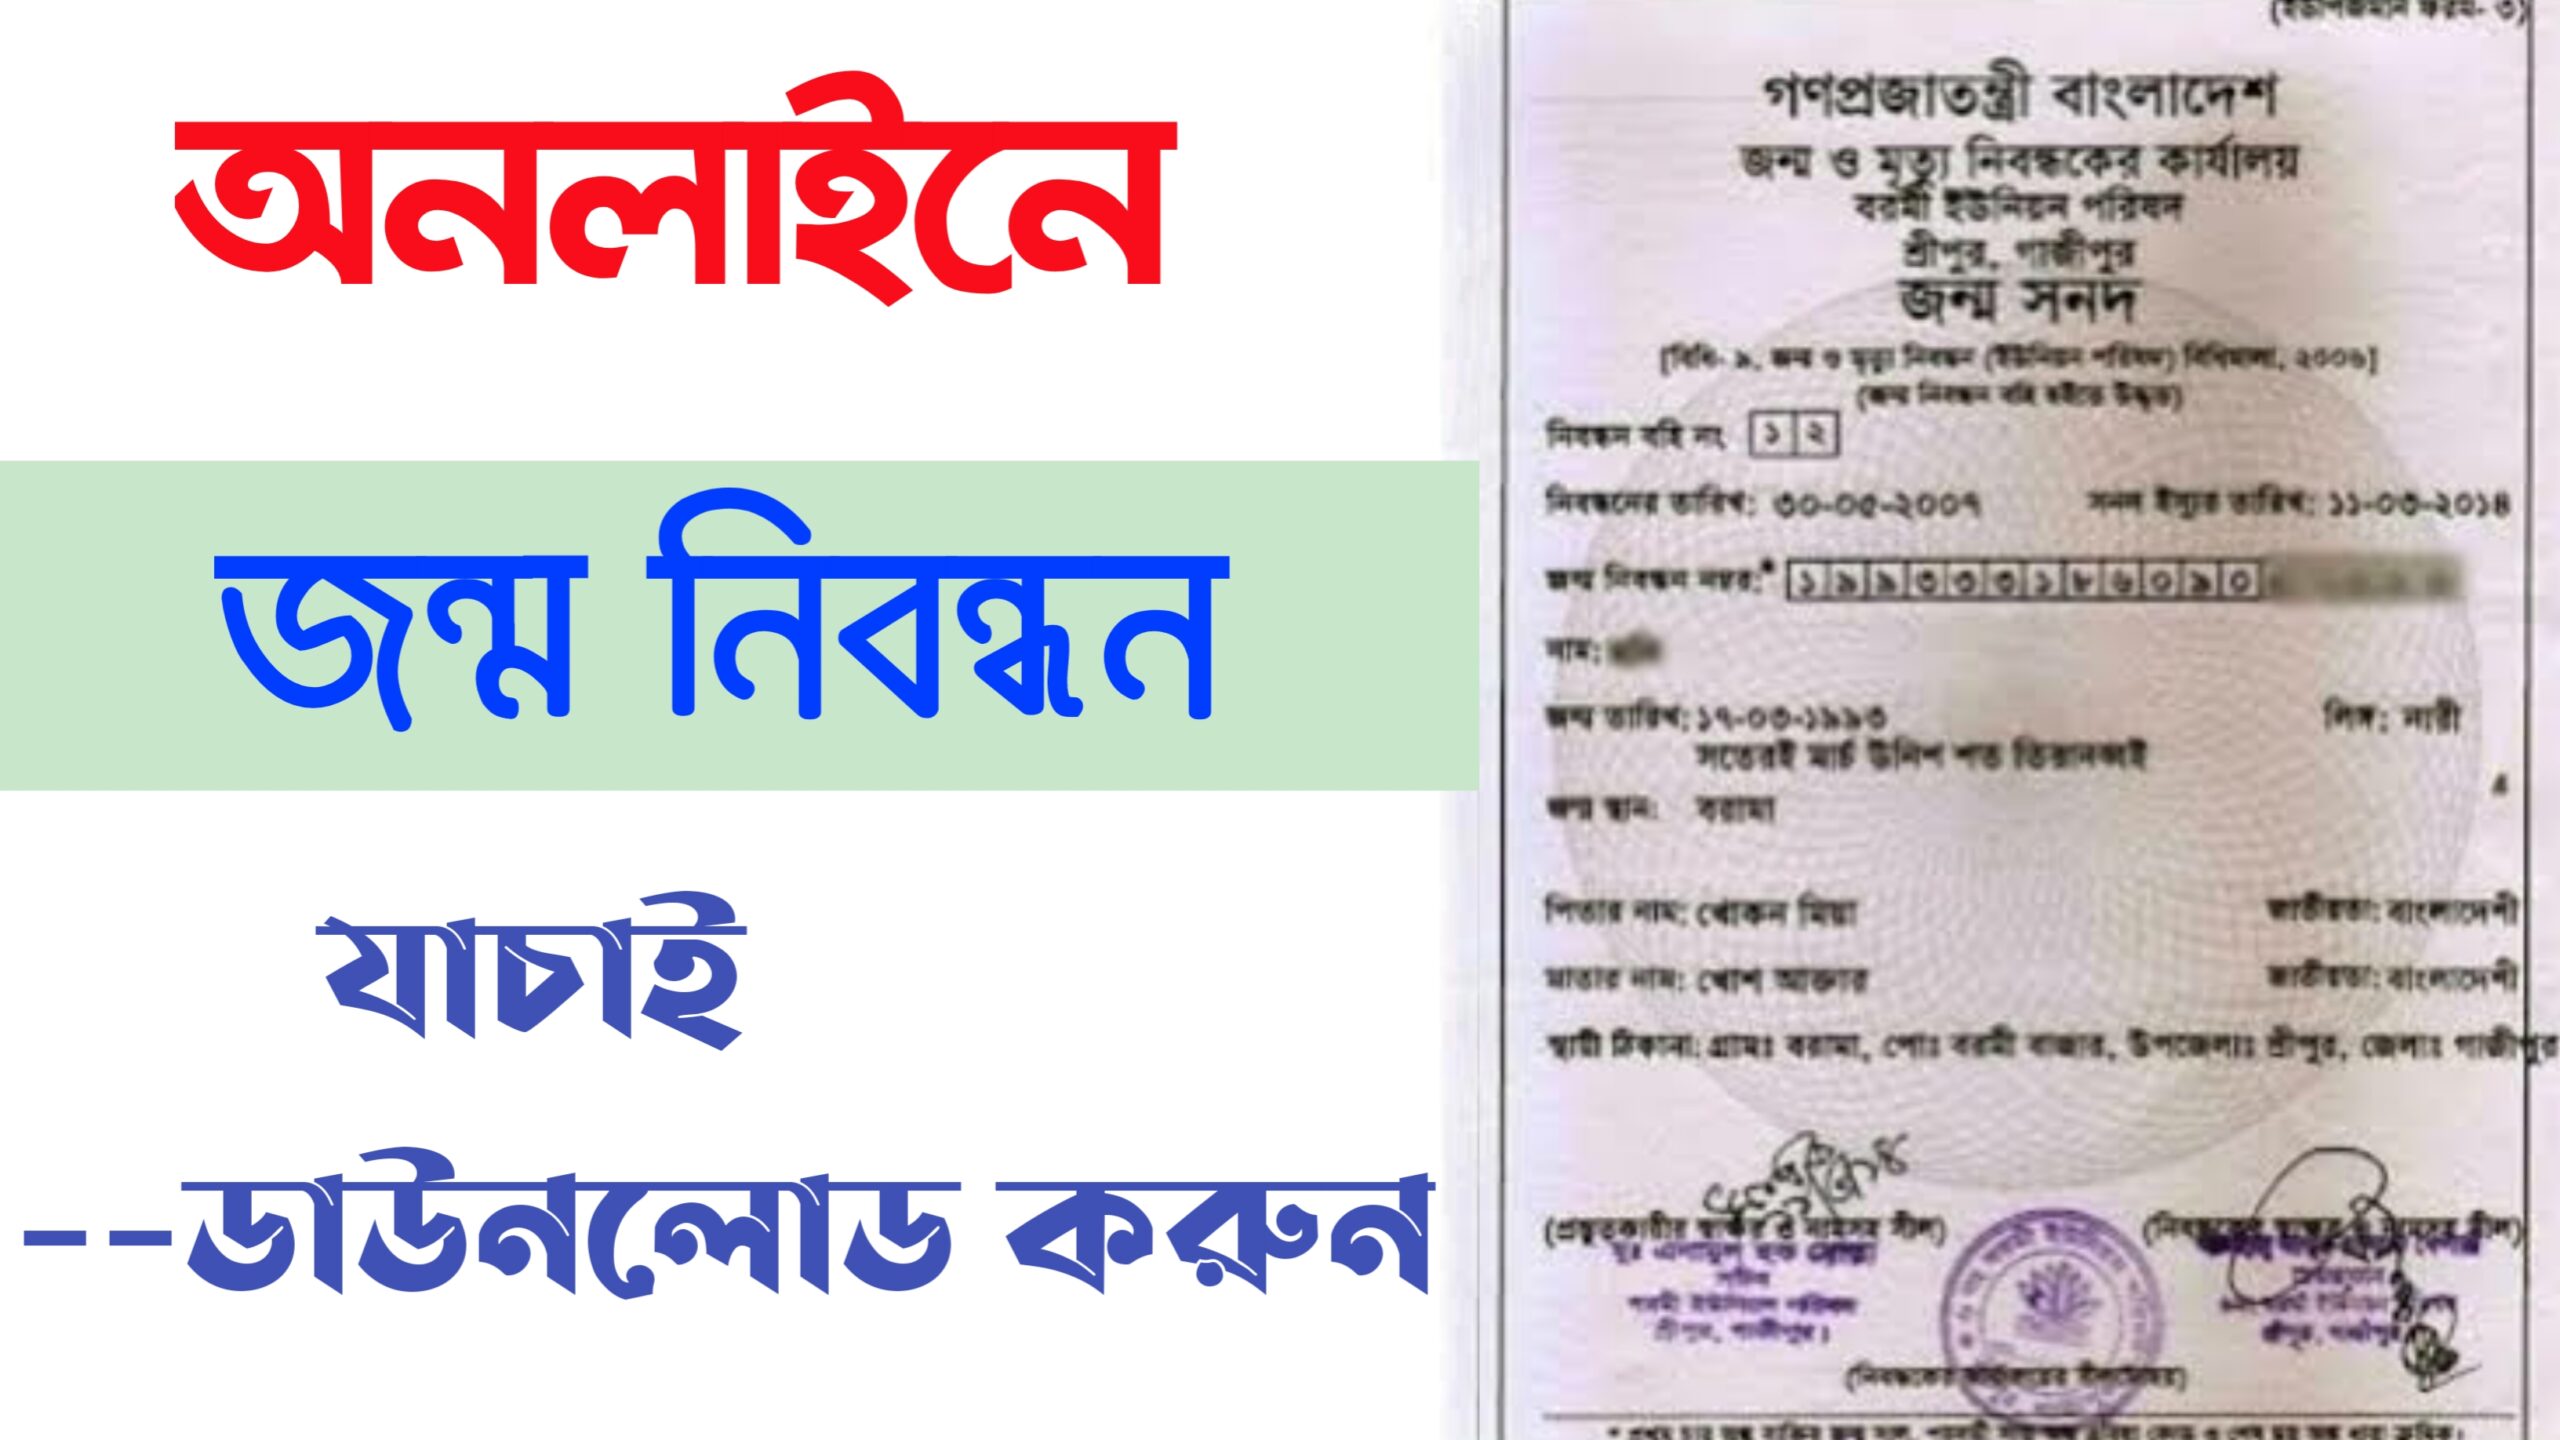 How To check Birth Certificate online and Download In Bd - Kaler Tech